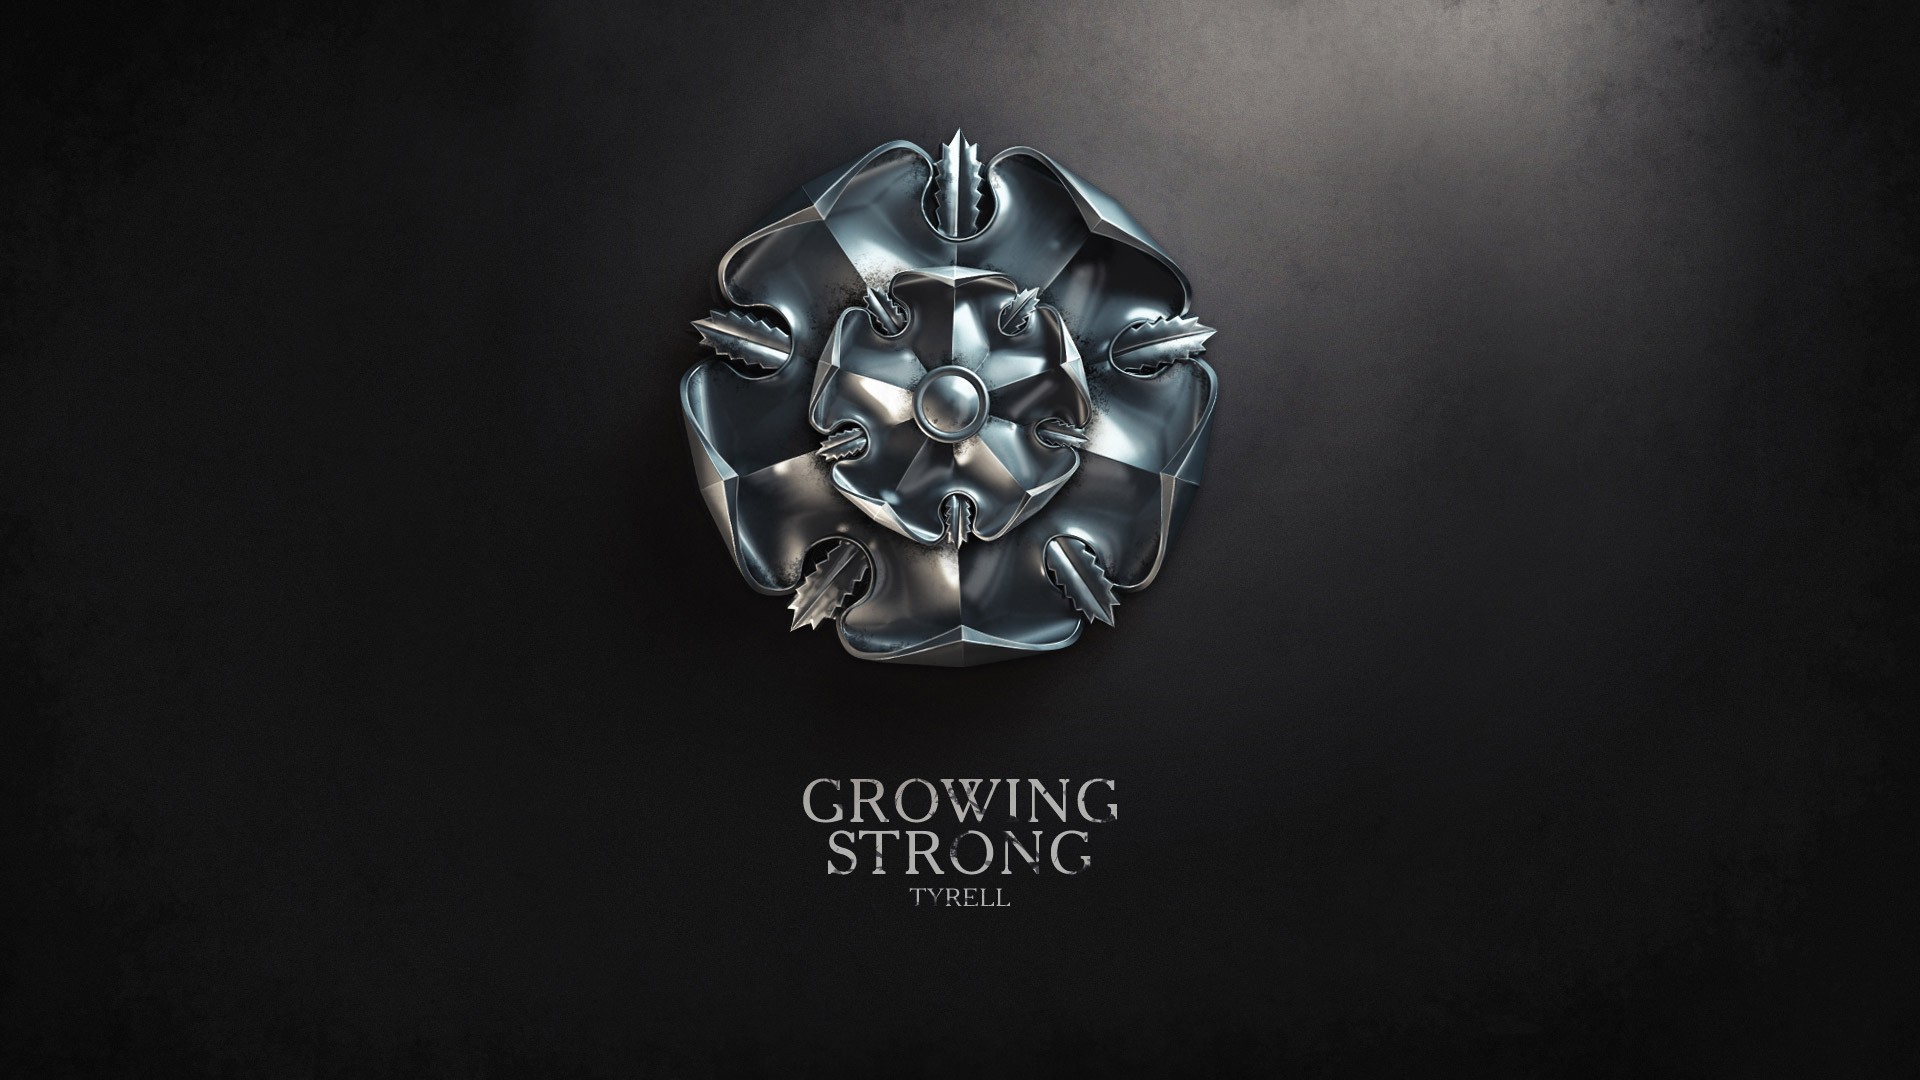 Growing Strong Tyrell Game Of Thrones Background Cool Image